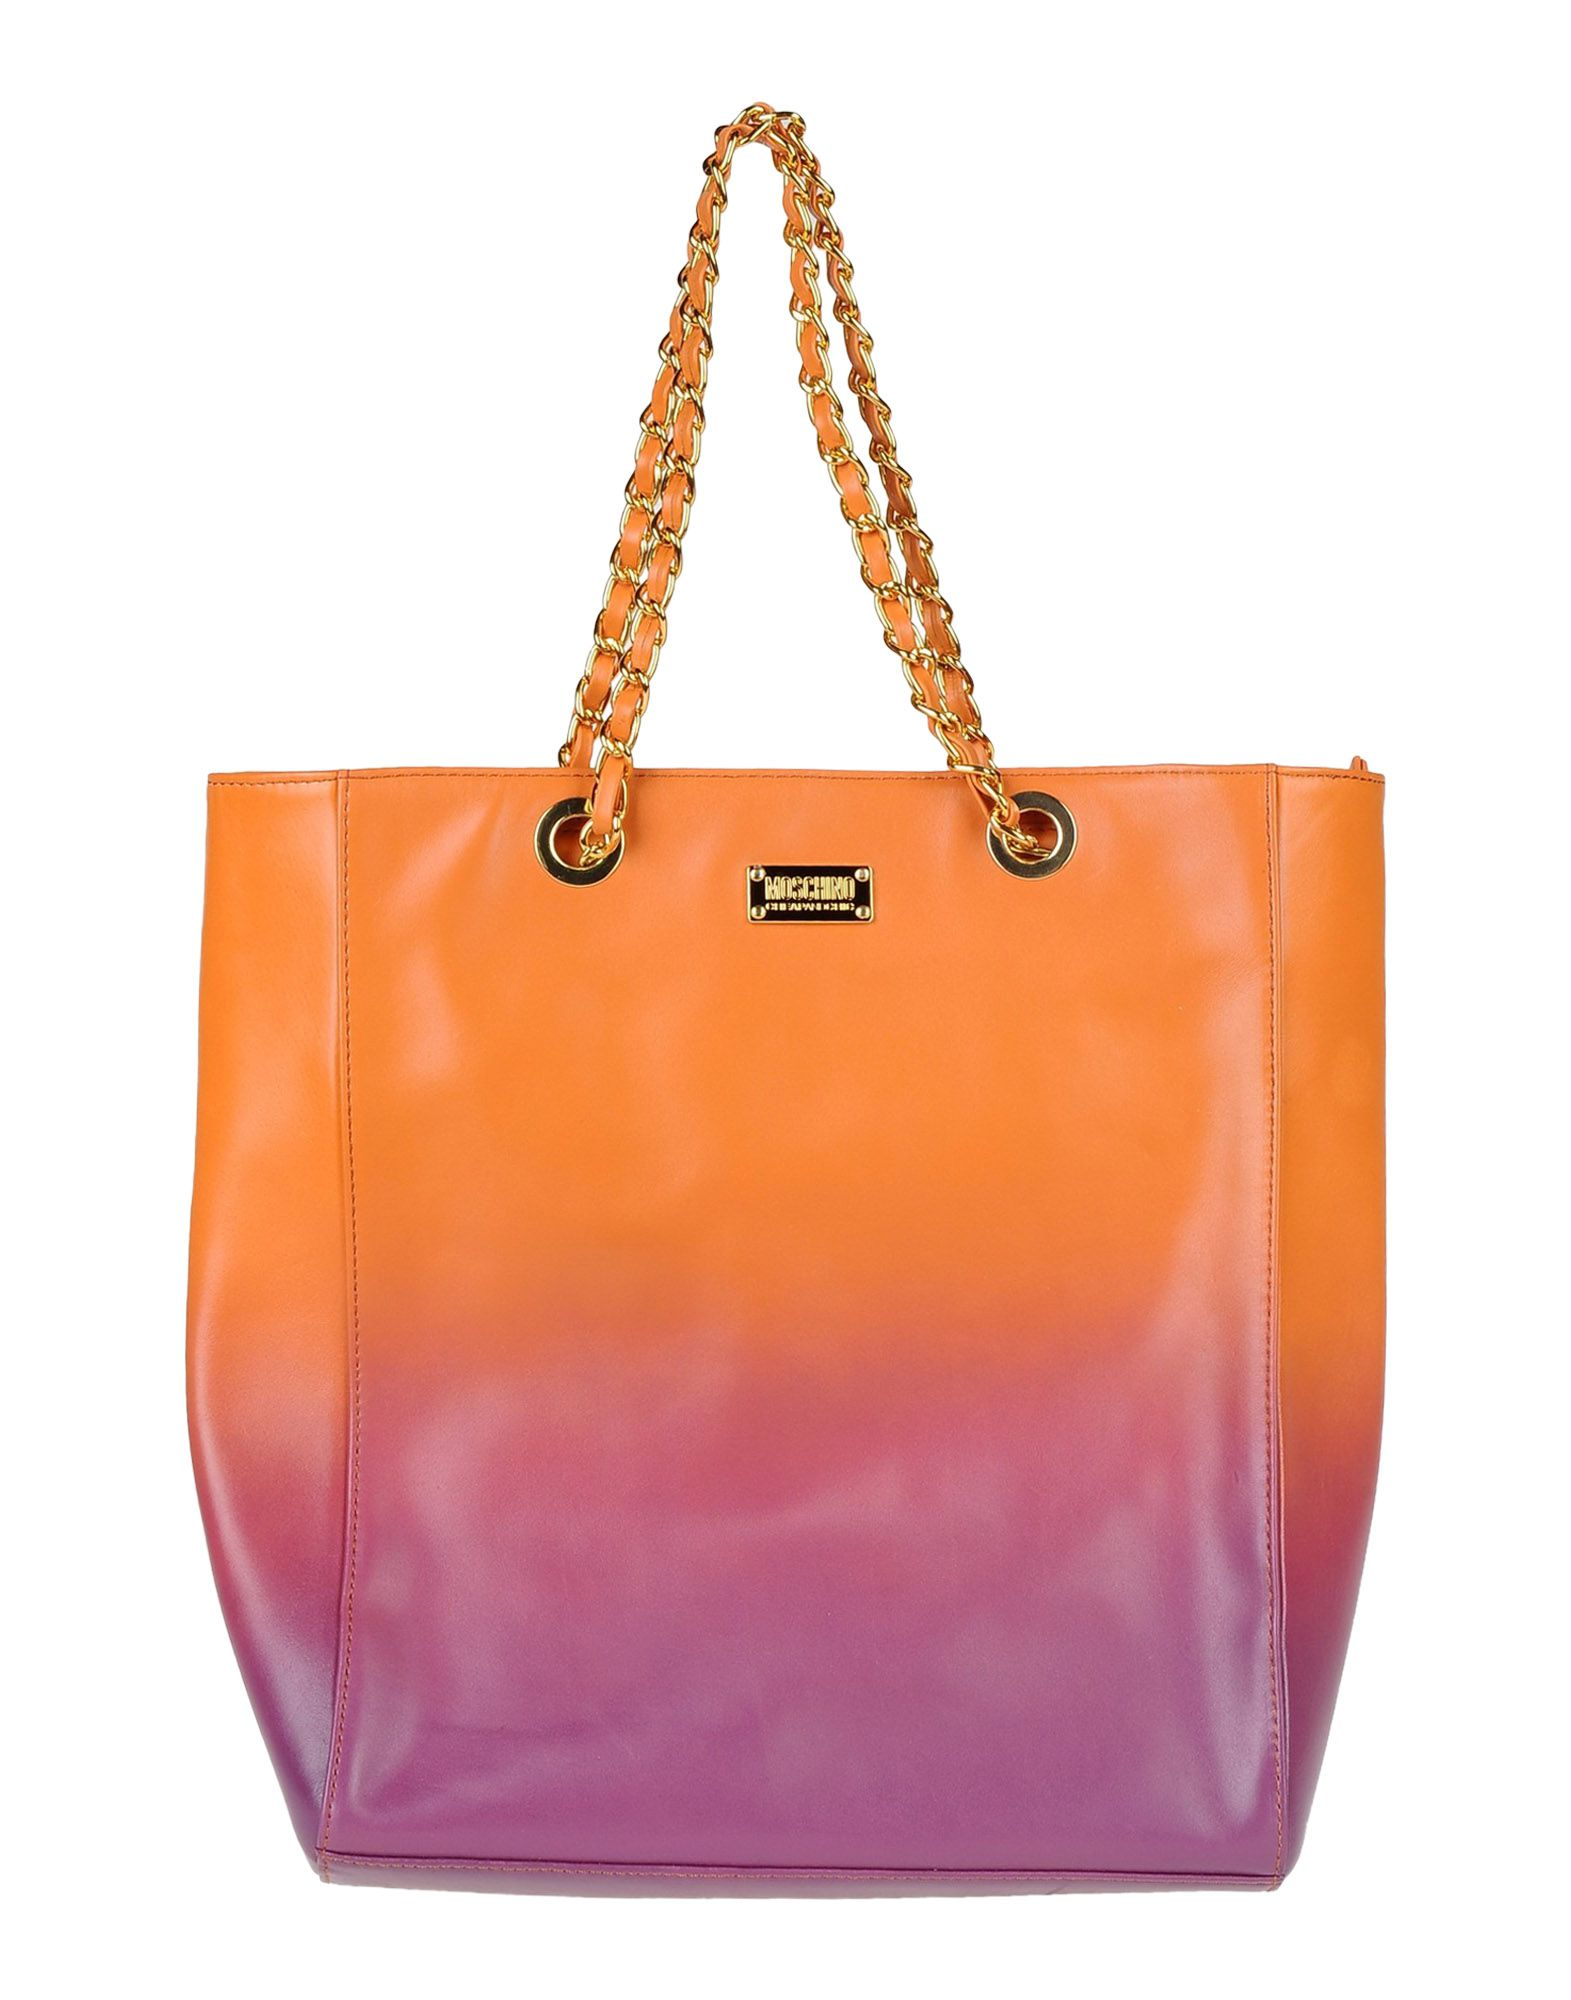 Moschino Cheap & Chic Large Leather Bag in Orange | Lyst